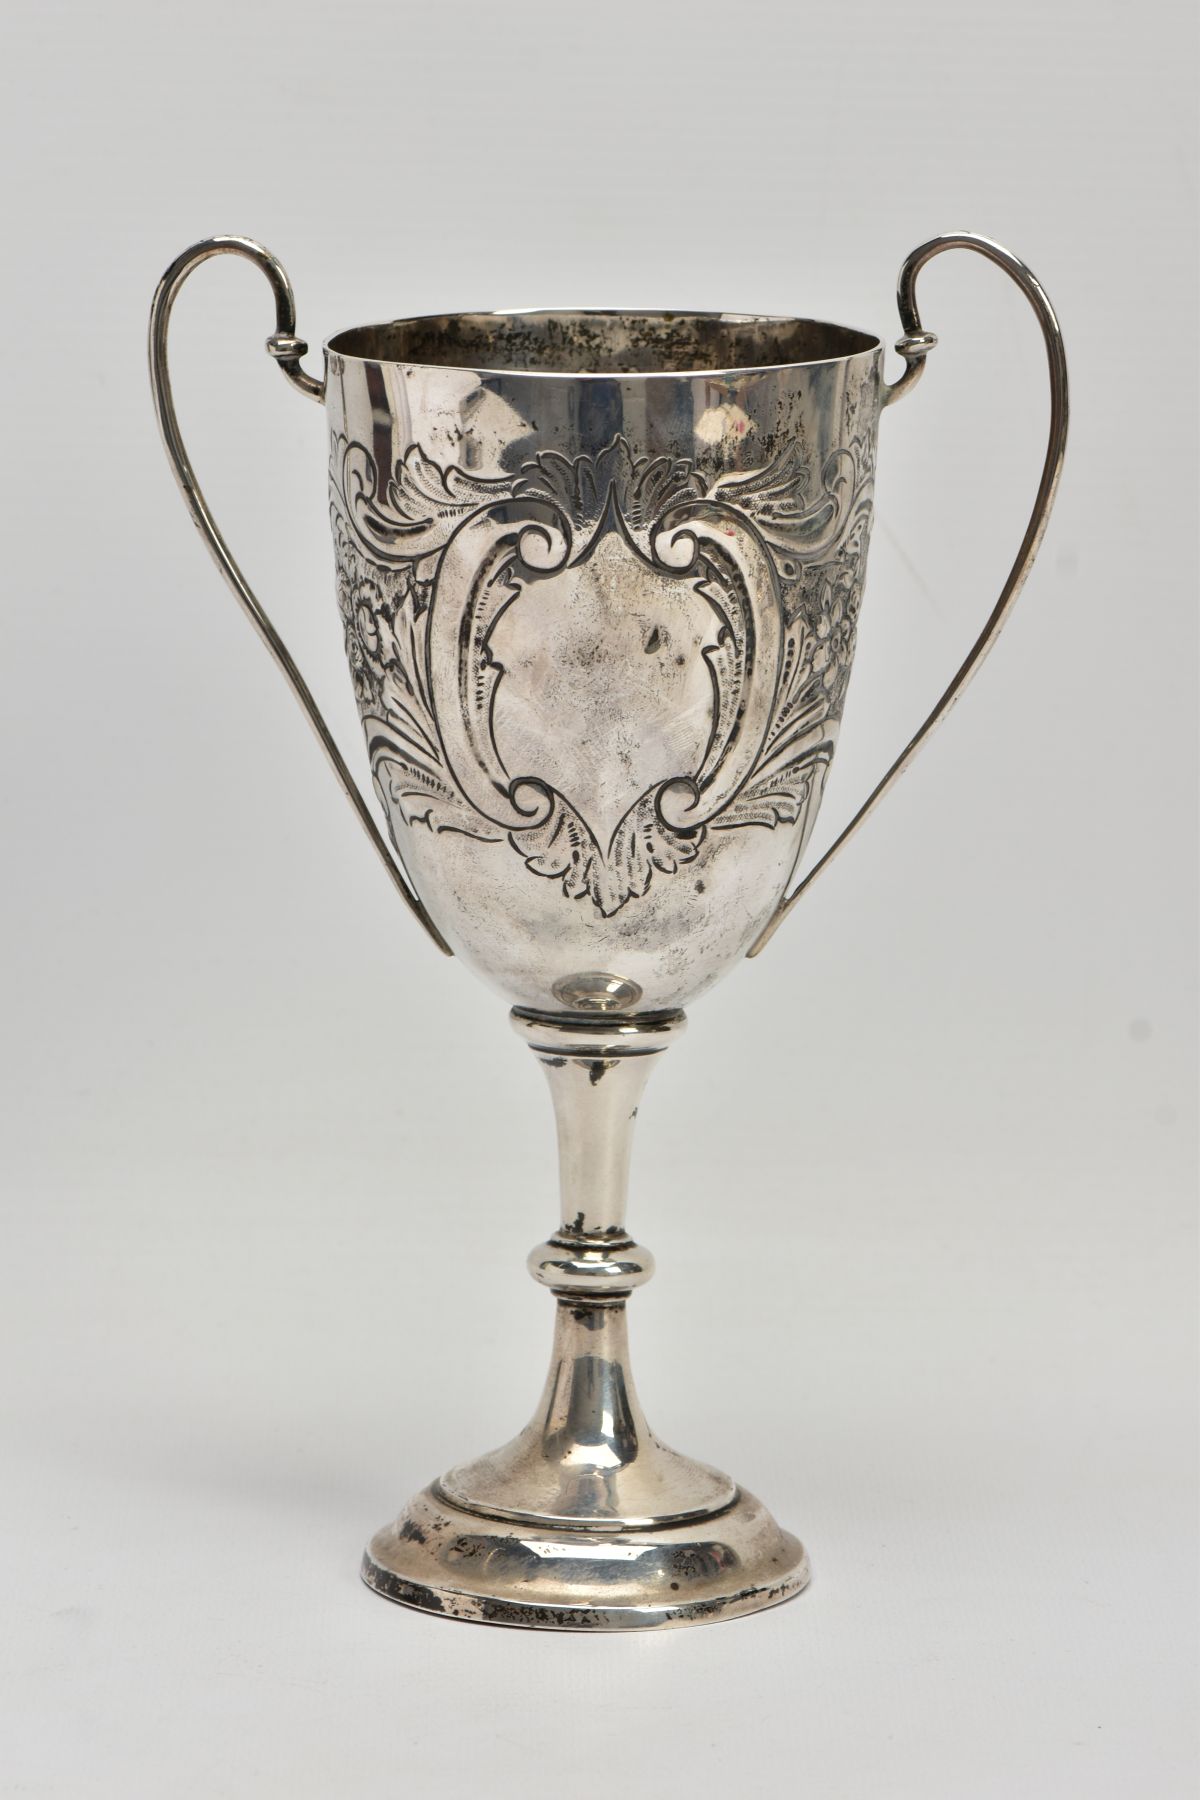 A SILVER TROPHY CUP, double scroll handles, embossed floral and foliate design, with a vacant